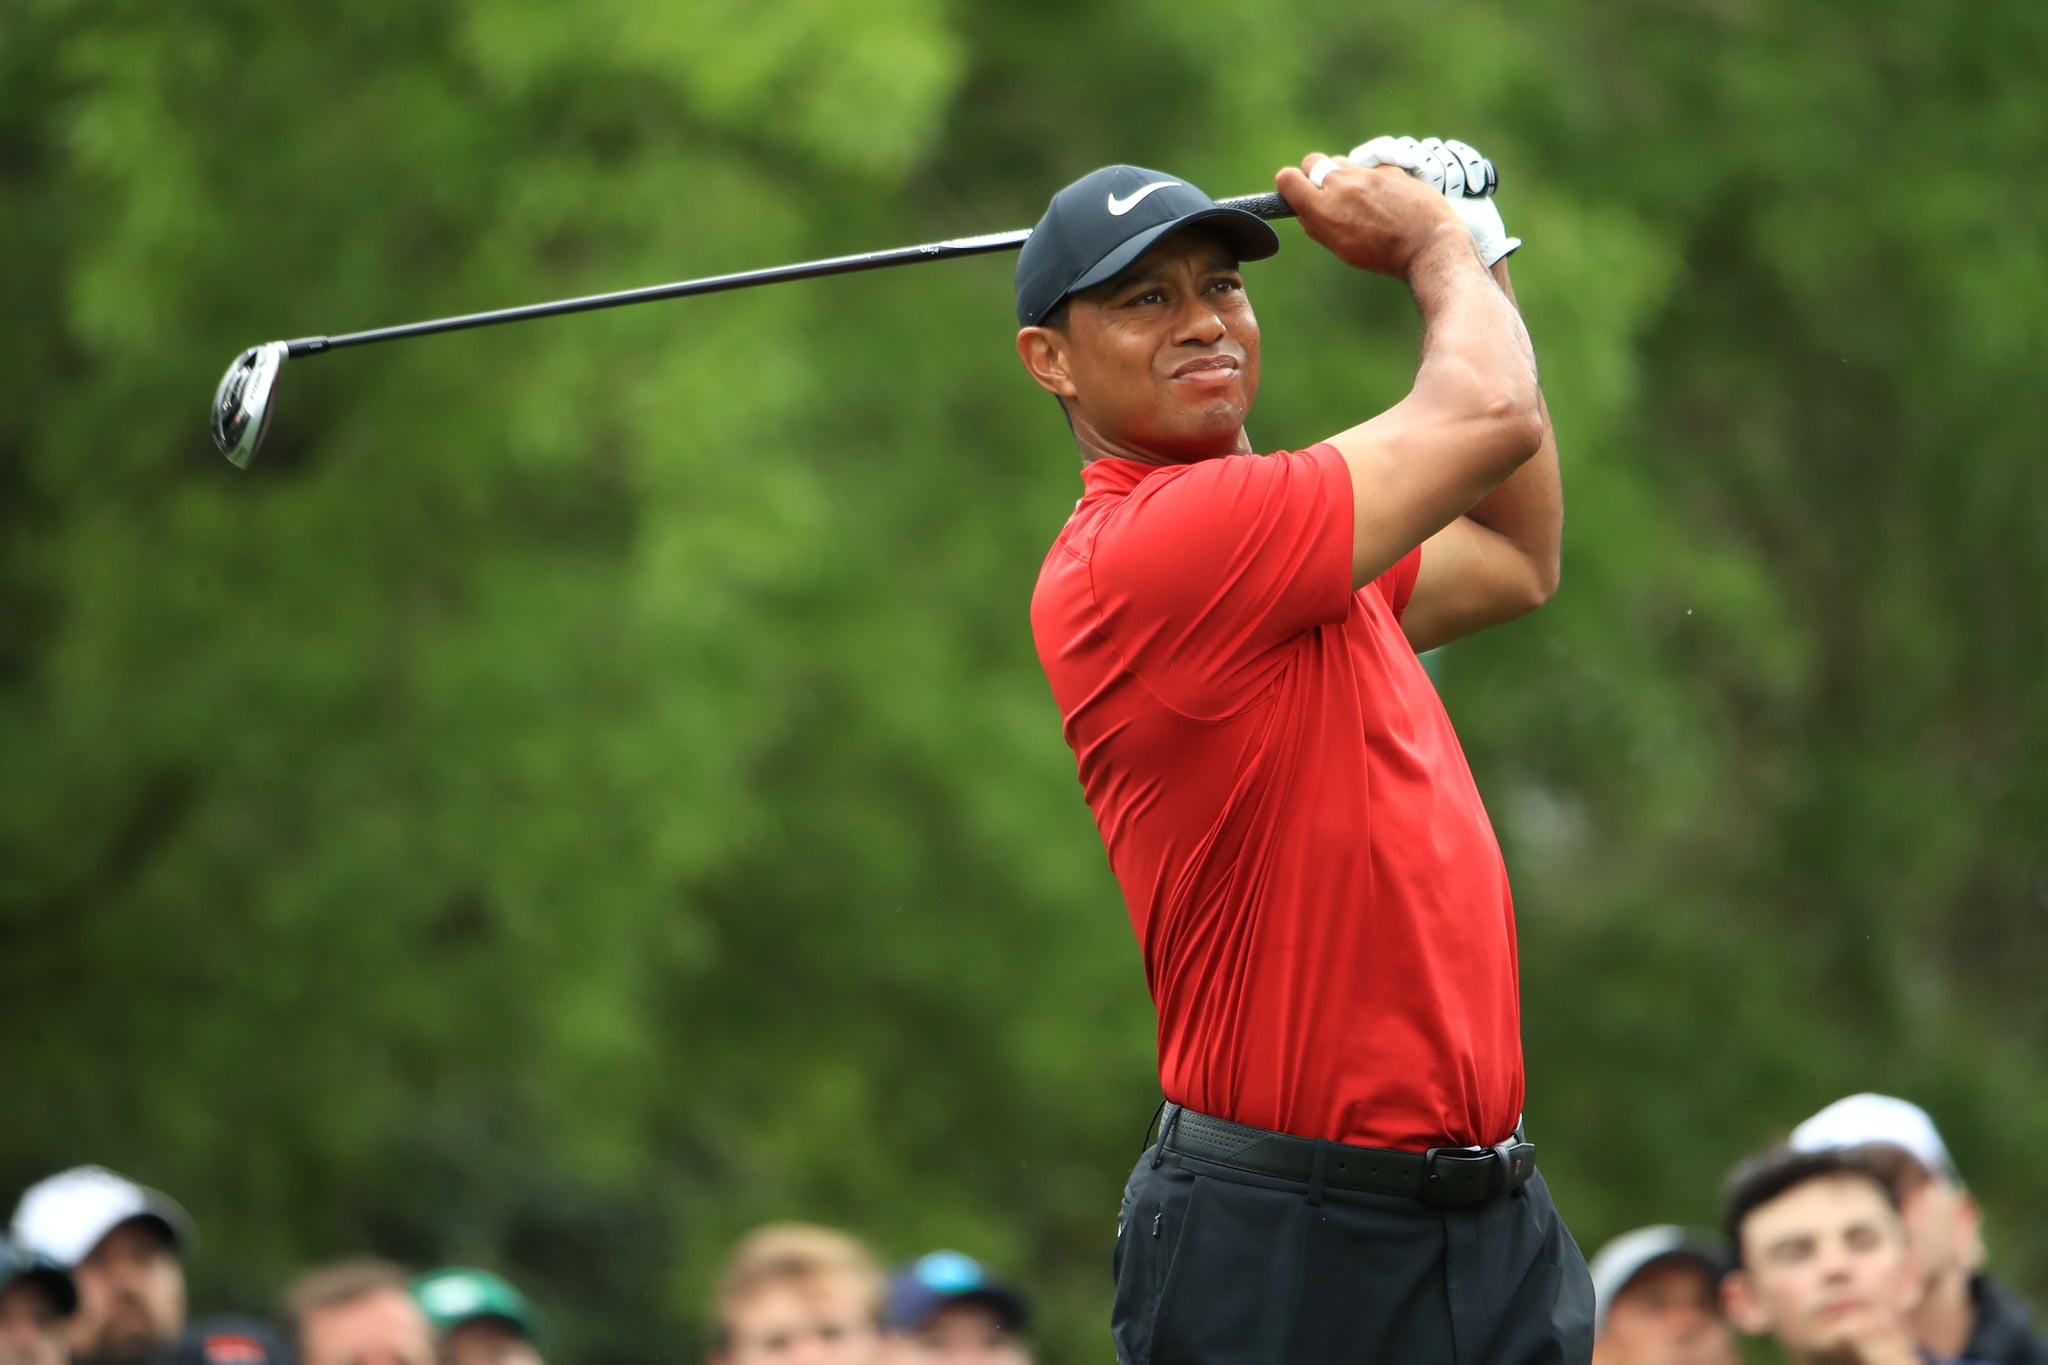 AUGUSTA, GEORGIA - APRIL 14: Tiger Woods of the United States plays a shot from the fifth tee during the final round of the Masters at Augusta National Golf Club on April 14, 2019 in Augusta, Georgia. (Photo by Andrew Redington/Getty Images)